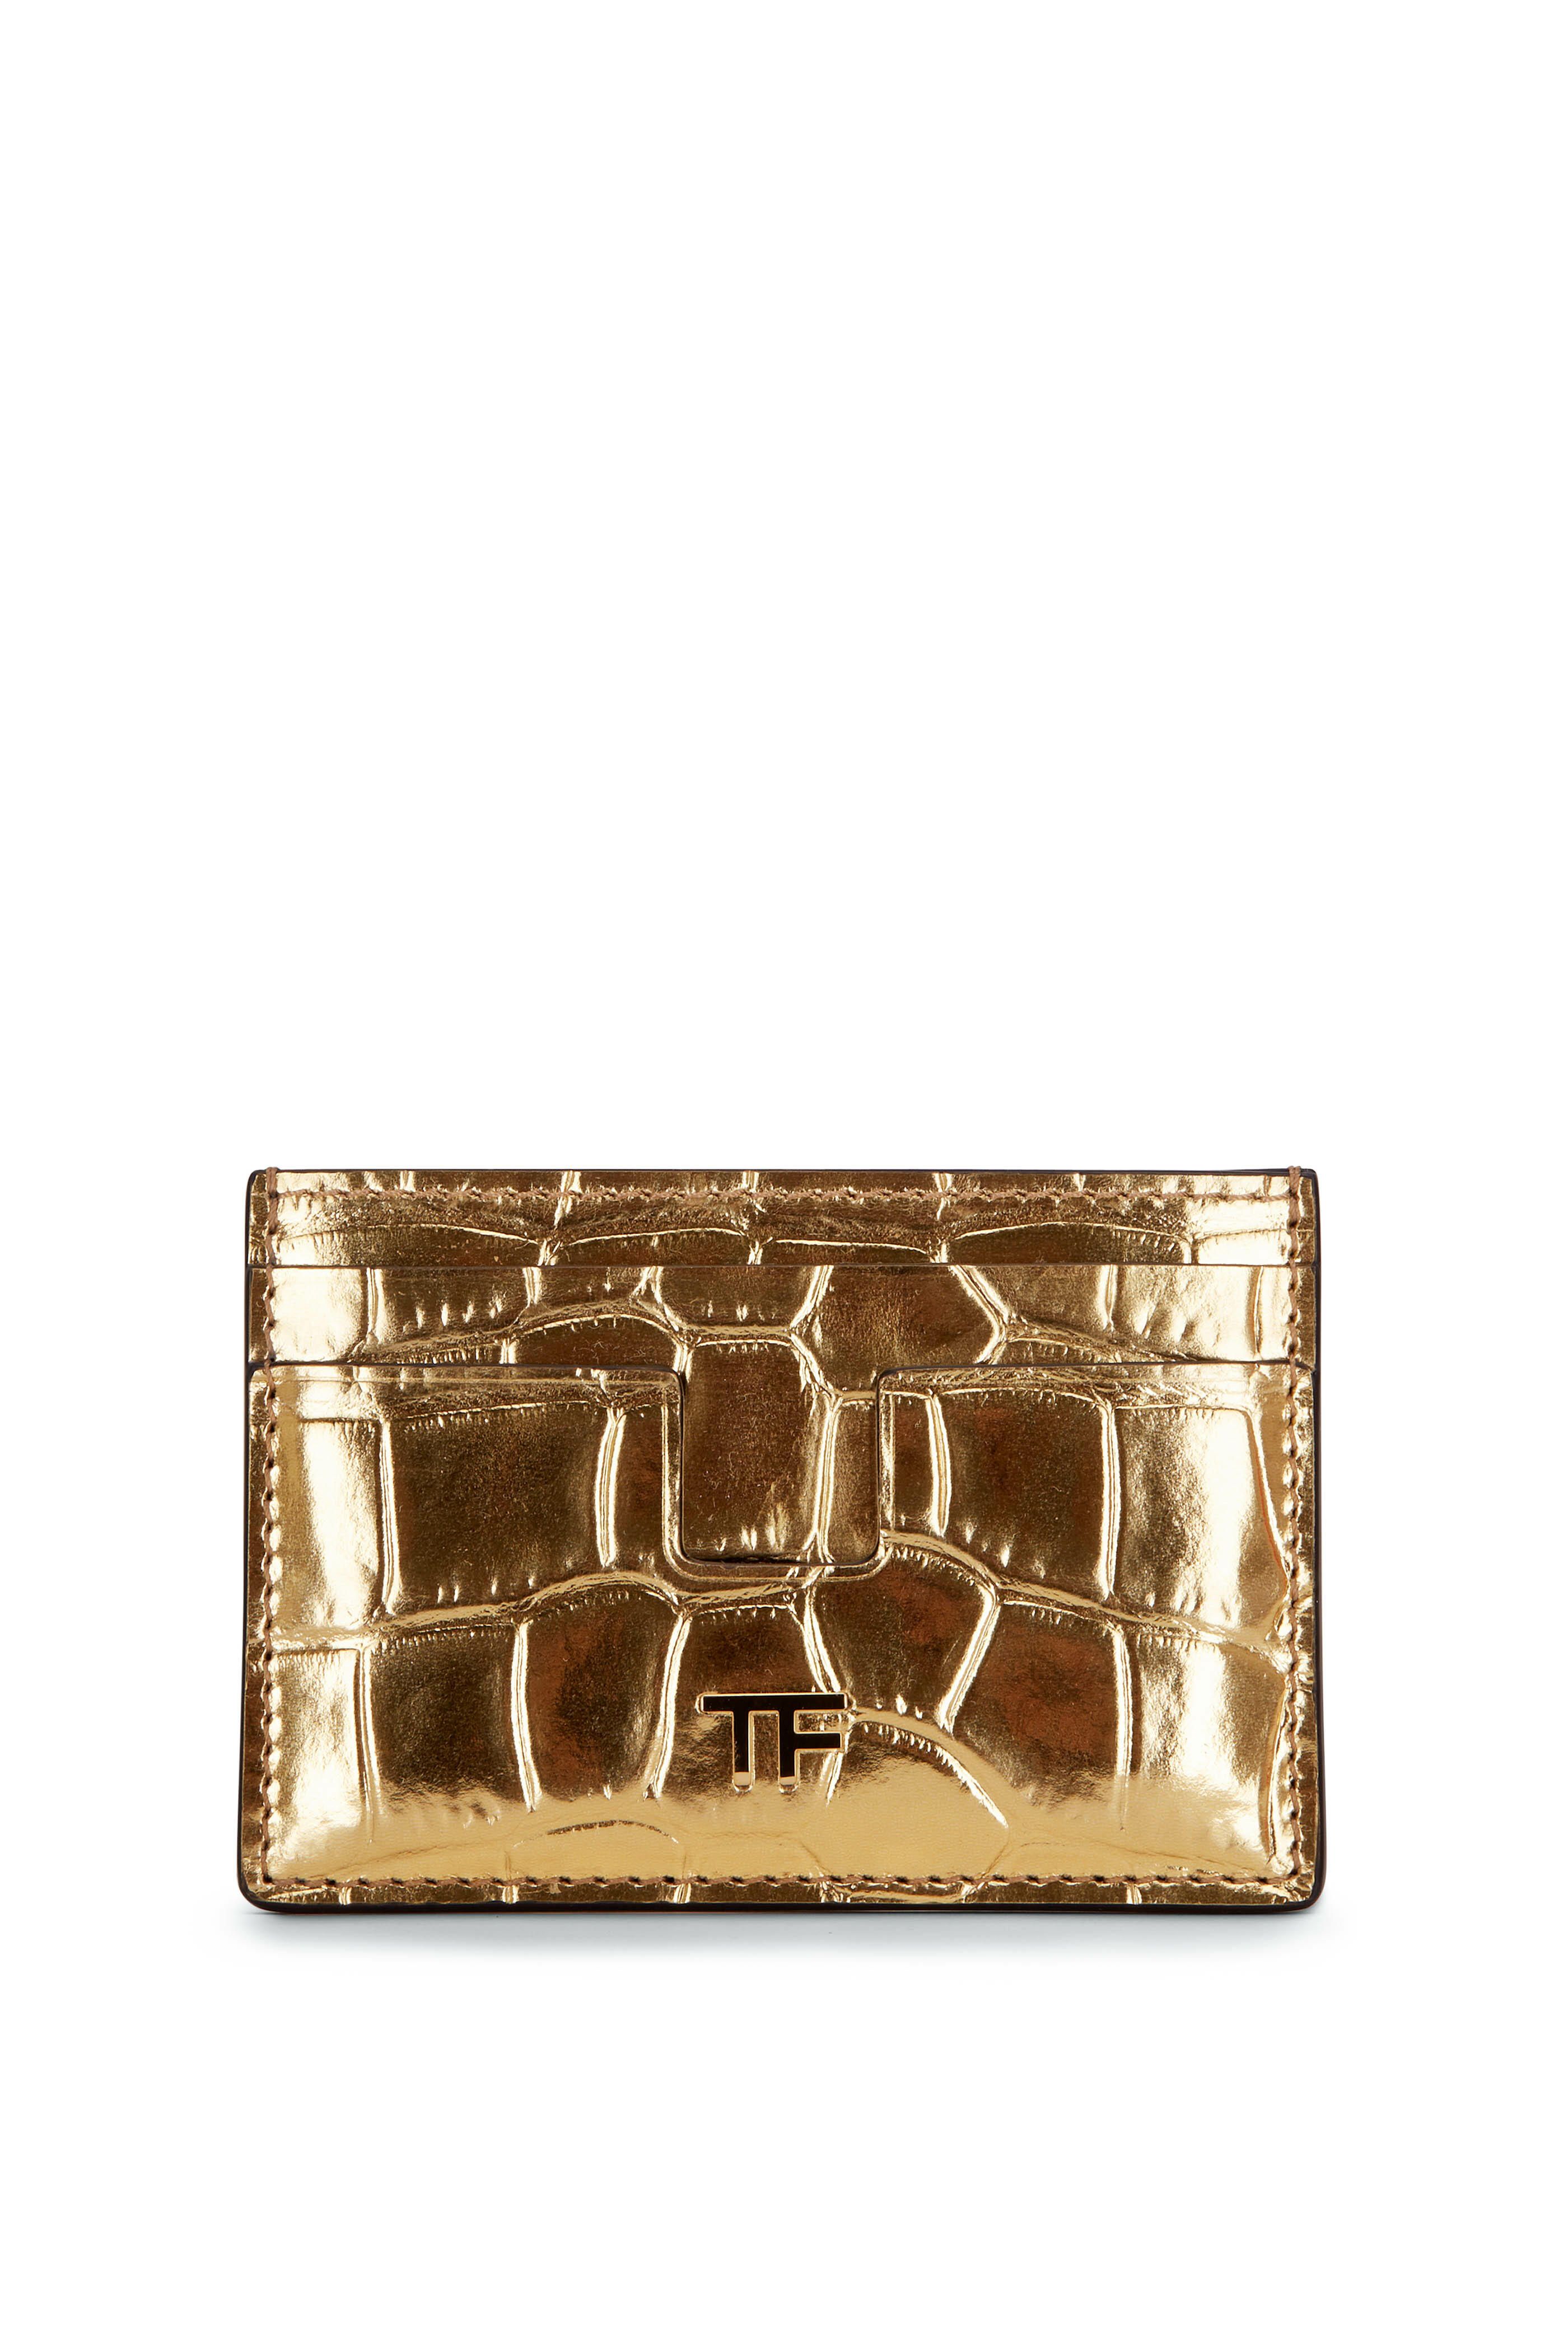 Tom Ford S0435 LCL348G SOFT METALLIC STAMPED CROC MULTIFUNCTIONAL Wall Gold